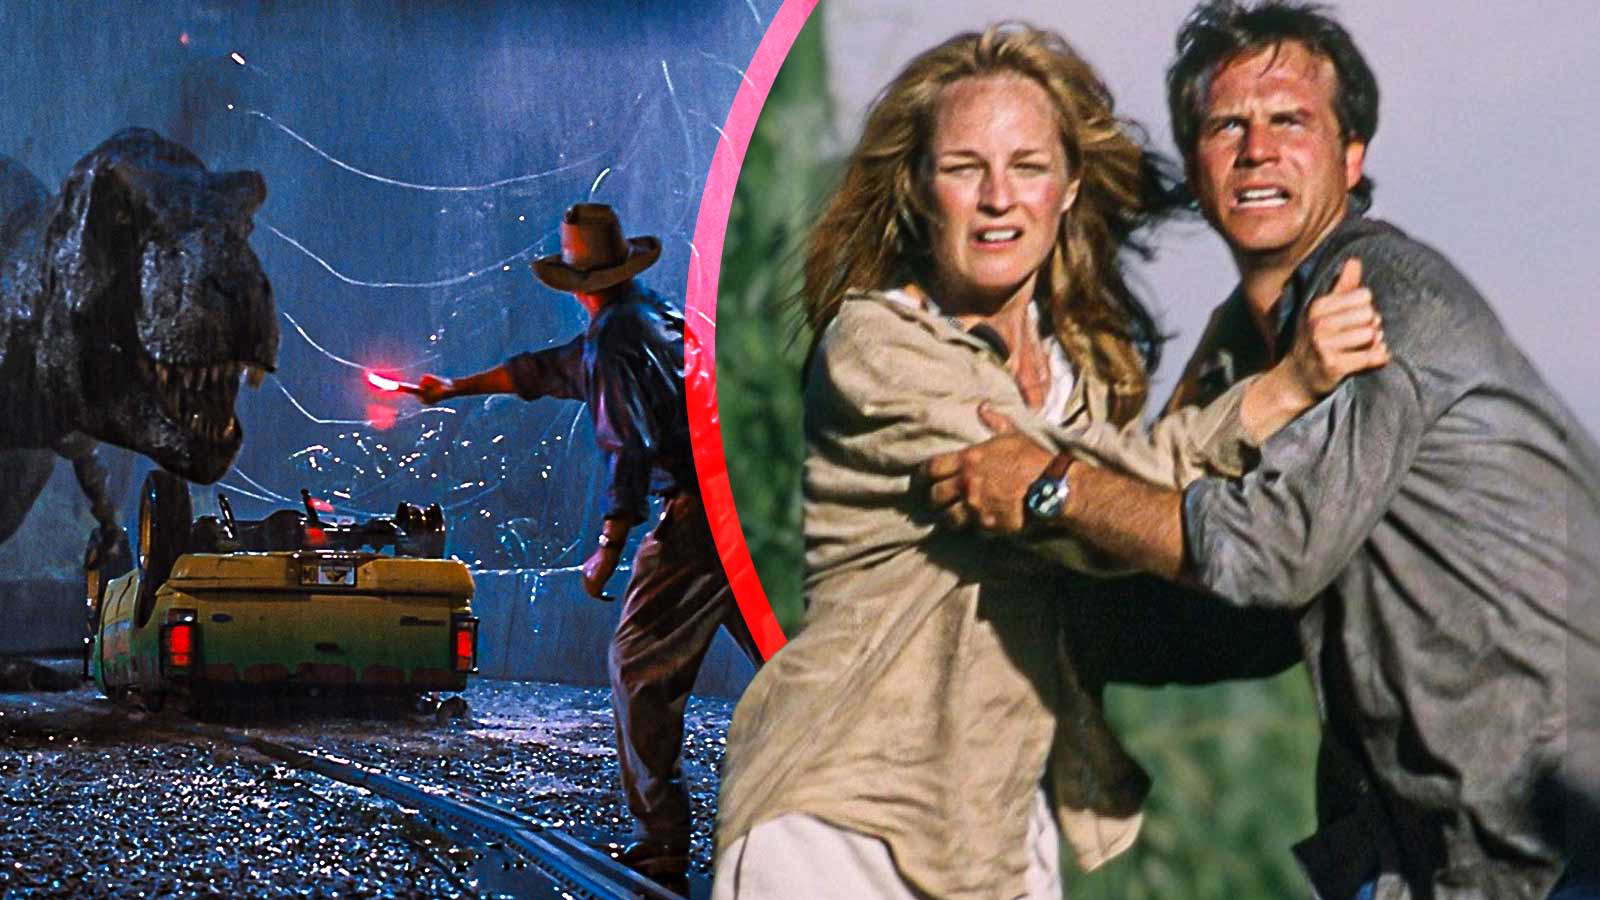 ‘Jurassic Park’ Creator’s Initial Script for ‘Twister’ Was Inspired By Cary Grant’ Famous 1940 Rom-Com That Finally Explains 1 Long-Held Mystery